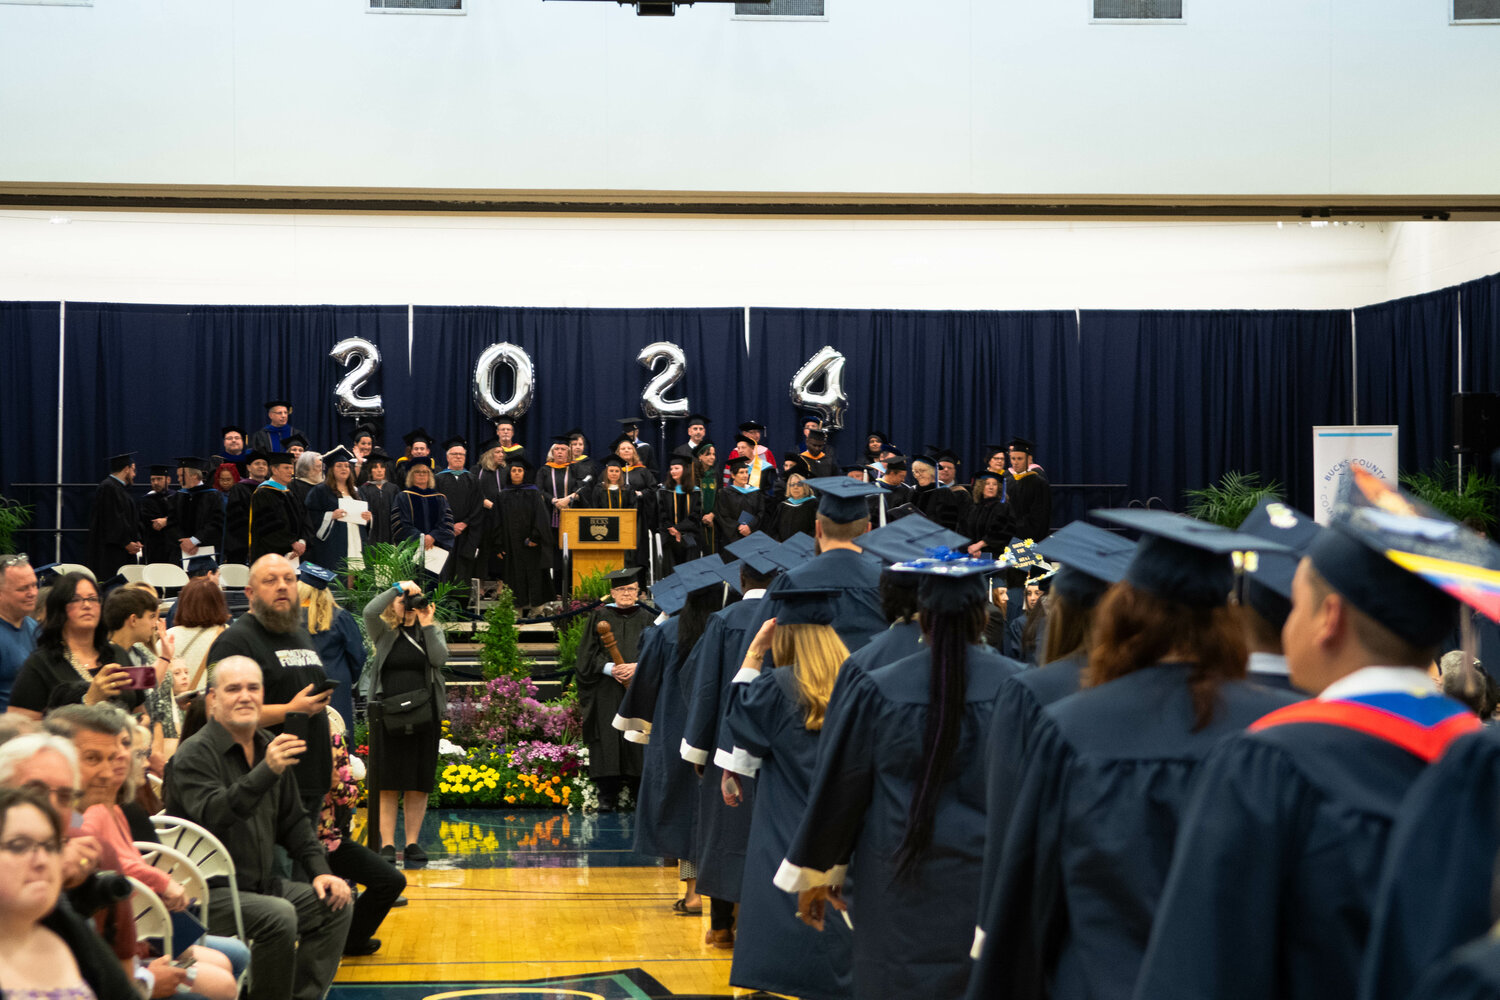 Graduates process into the gymnasium at the Newtown campus of Bucks County Community College for their commencement on May 16.